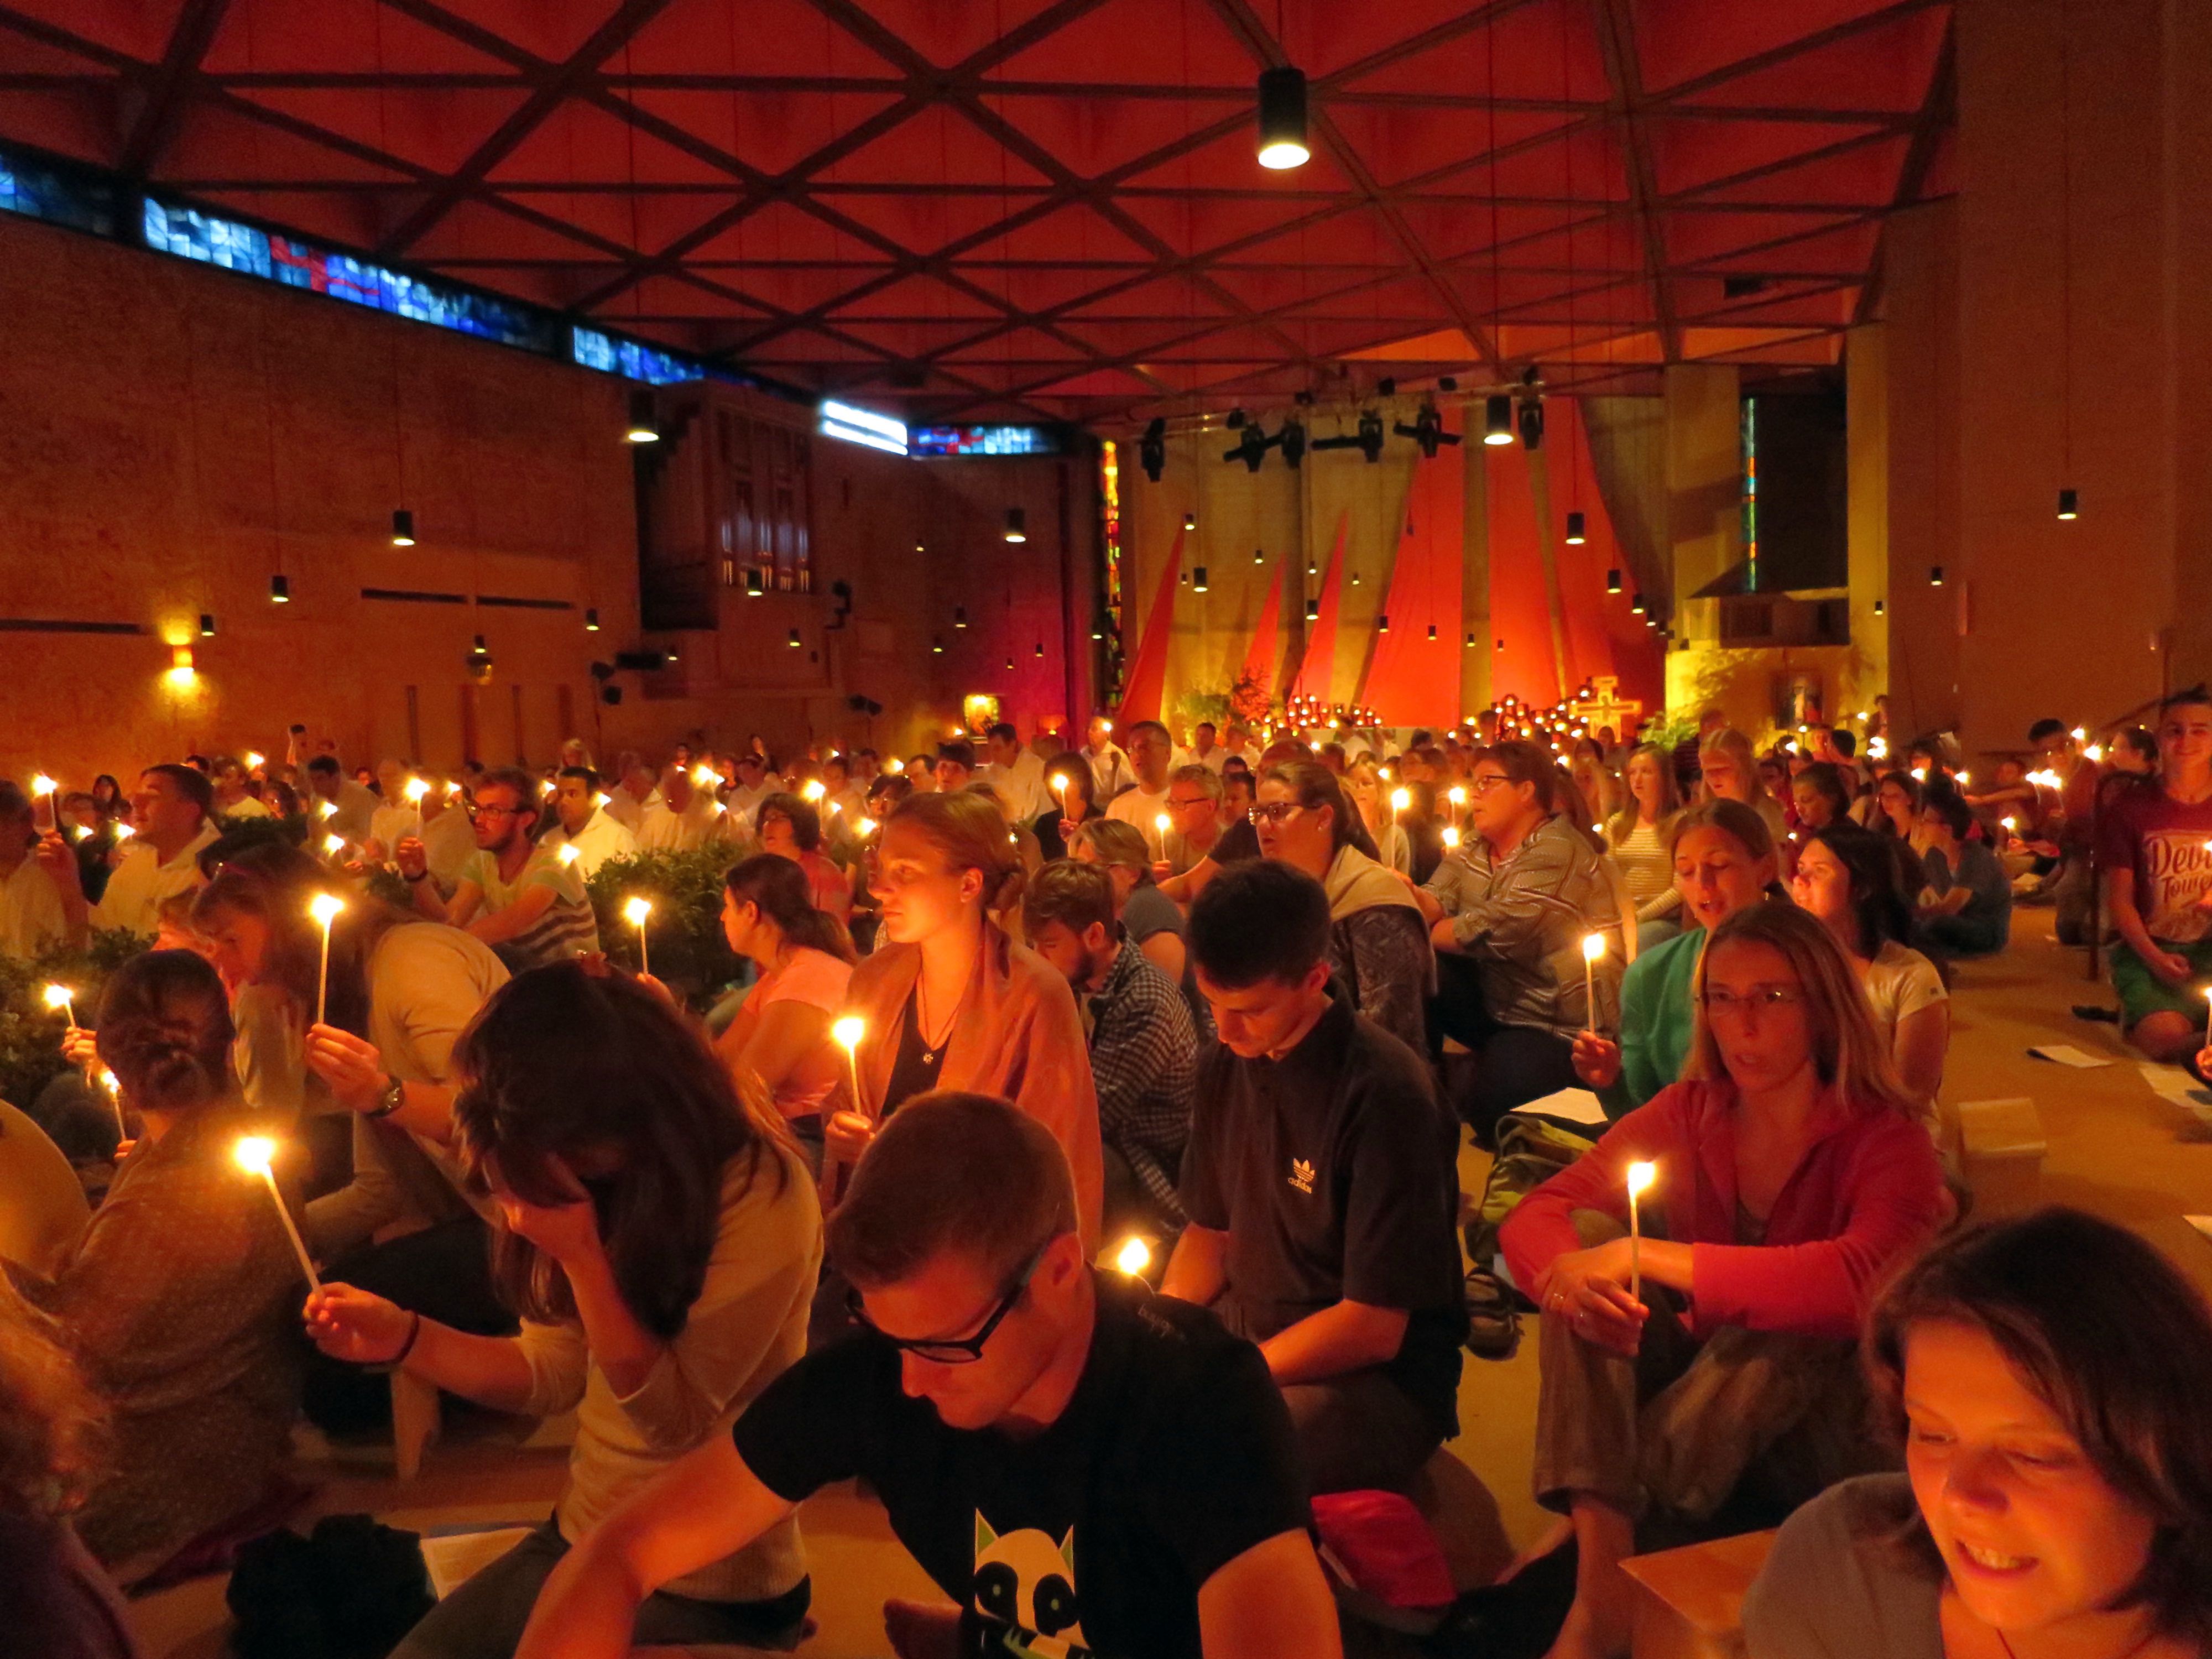 Pope Francis urges young adults at Taizé event to ‘dare to build a different world’